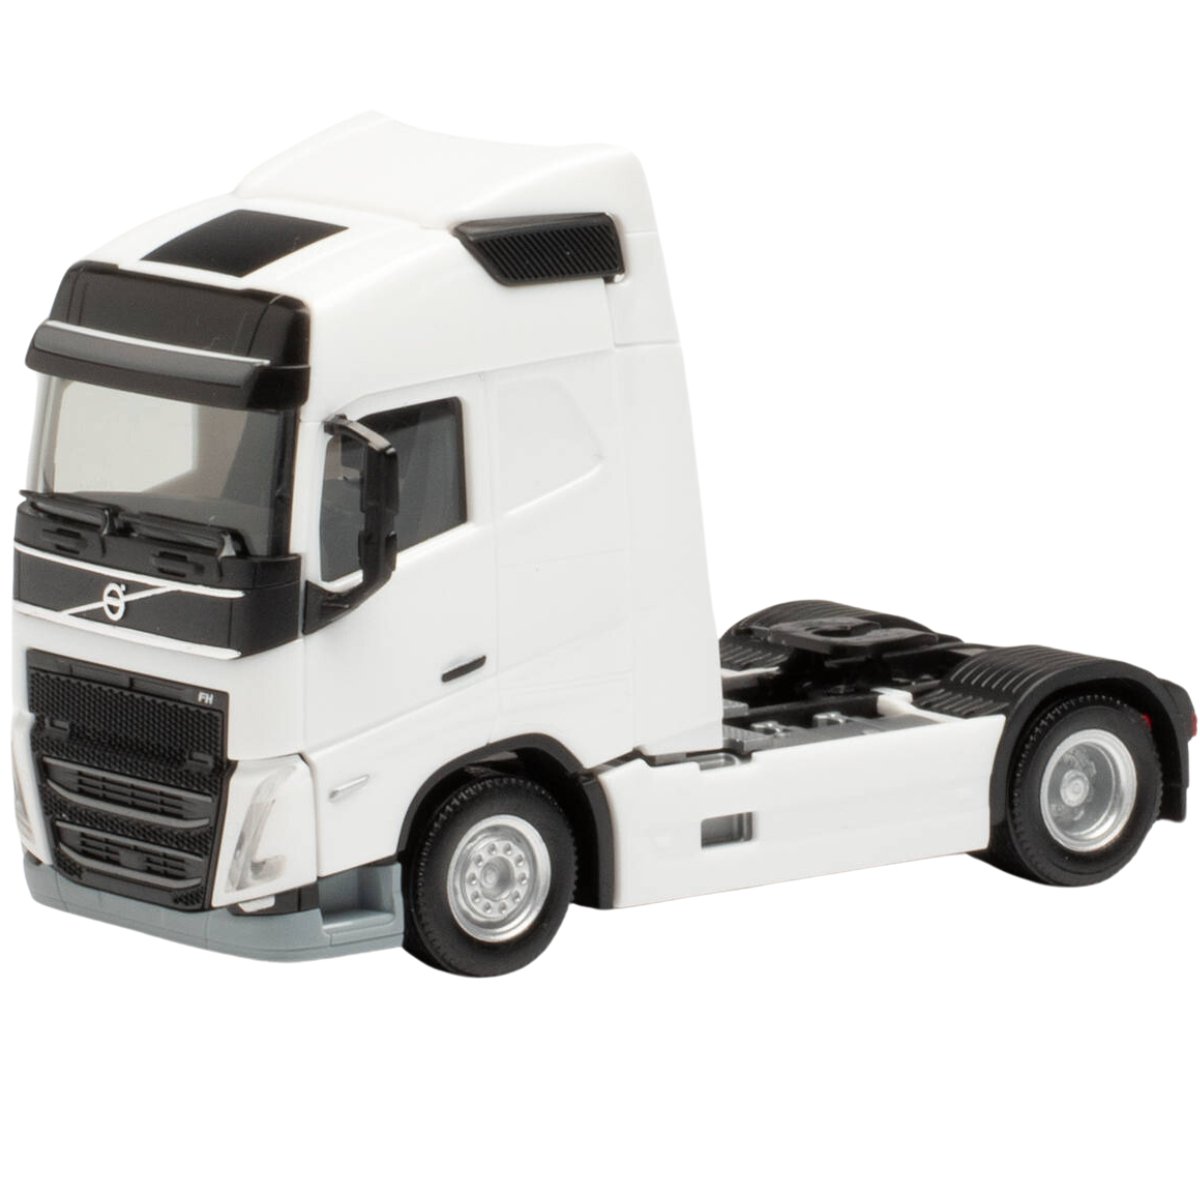 Herpa Volvo FH Gl 2020 Tractor Unit White - 1:87 Scale - Phillips Hobbies